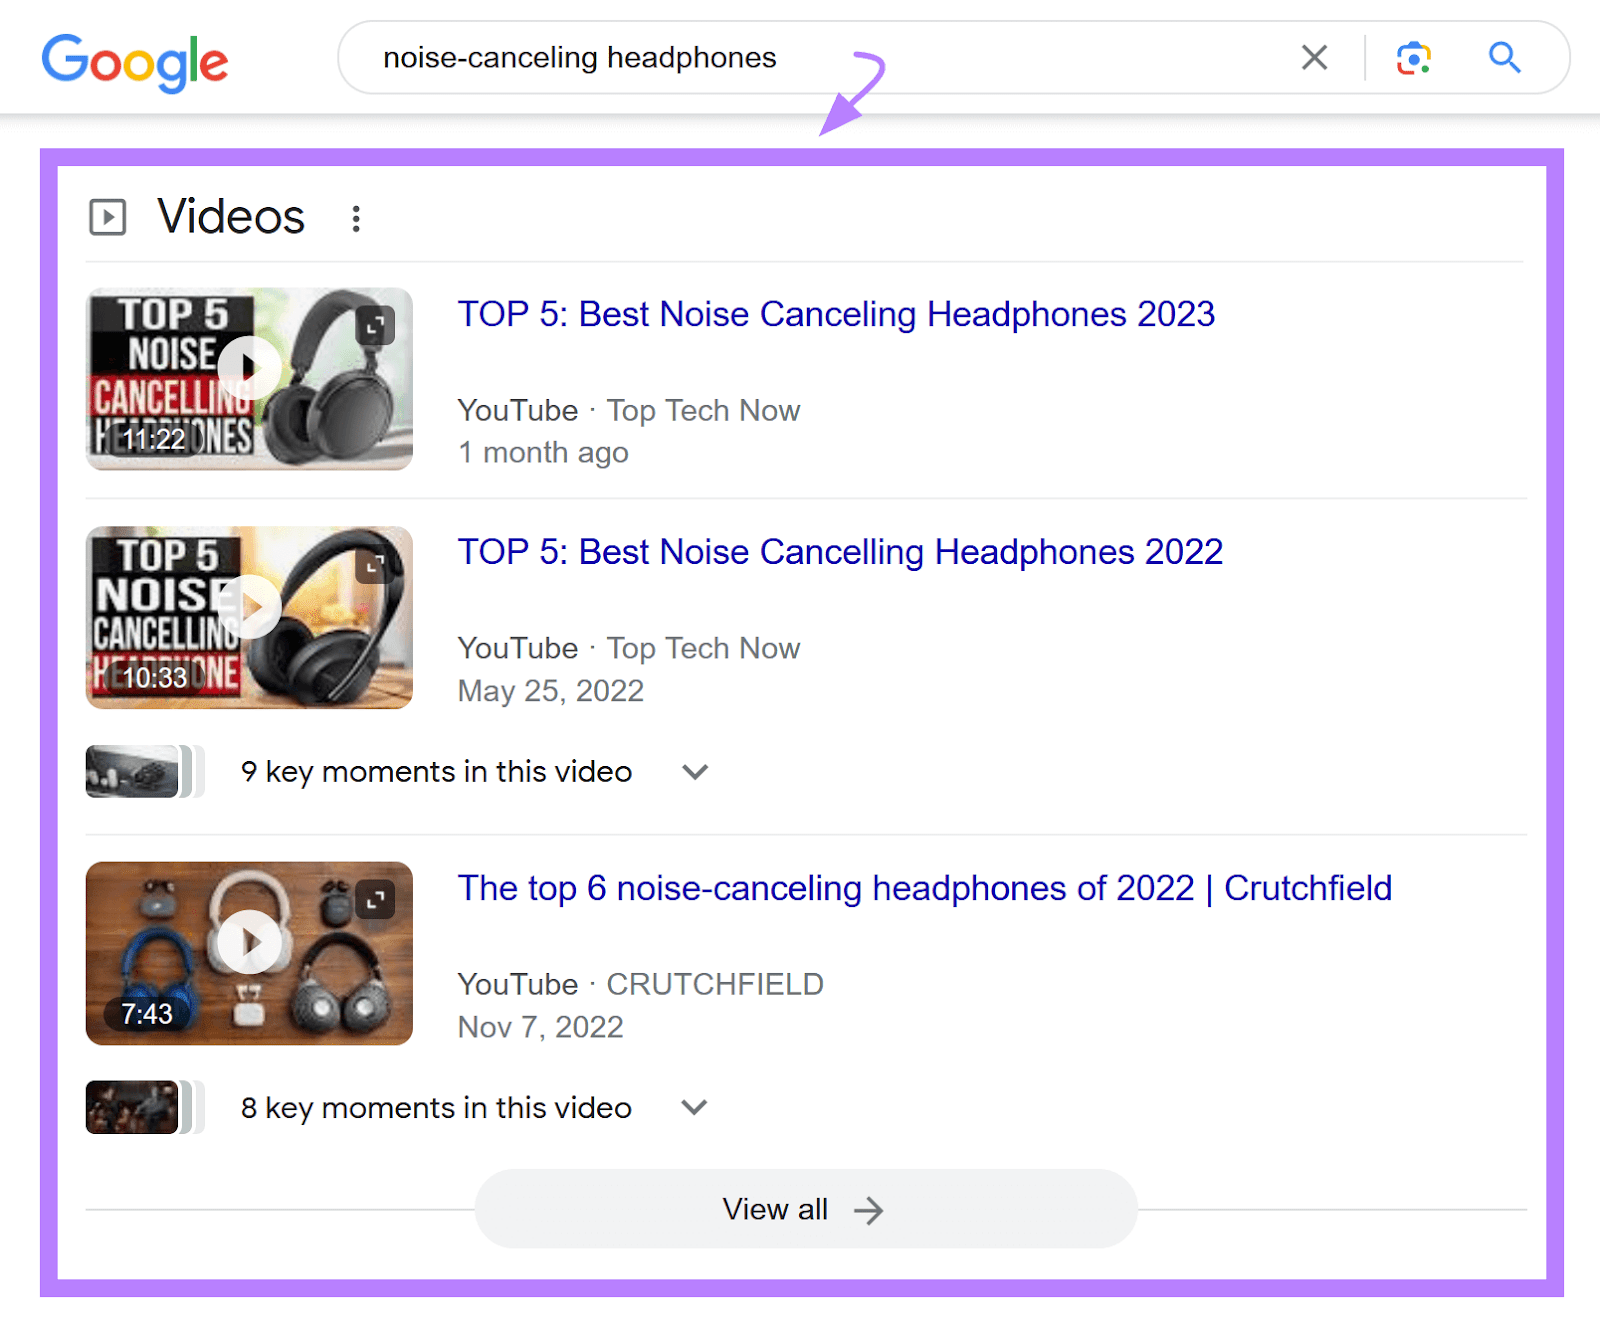 Video carousel example on Google SERP for "noise-canceling headphones" search